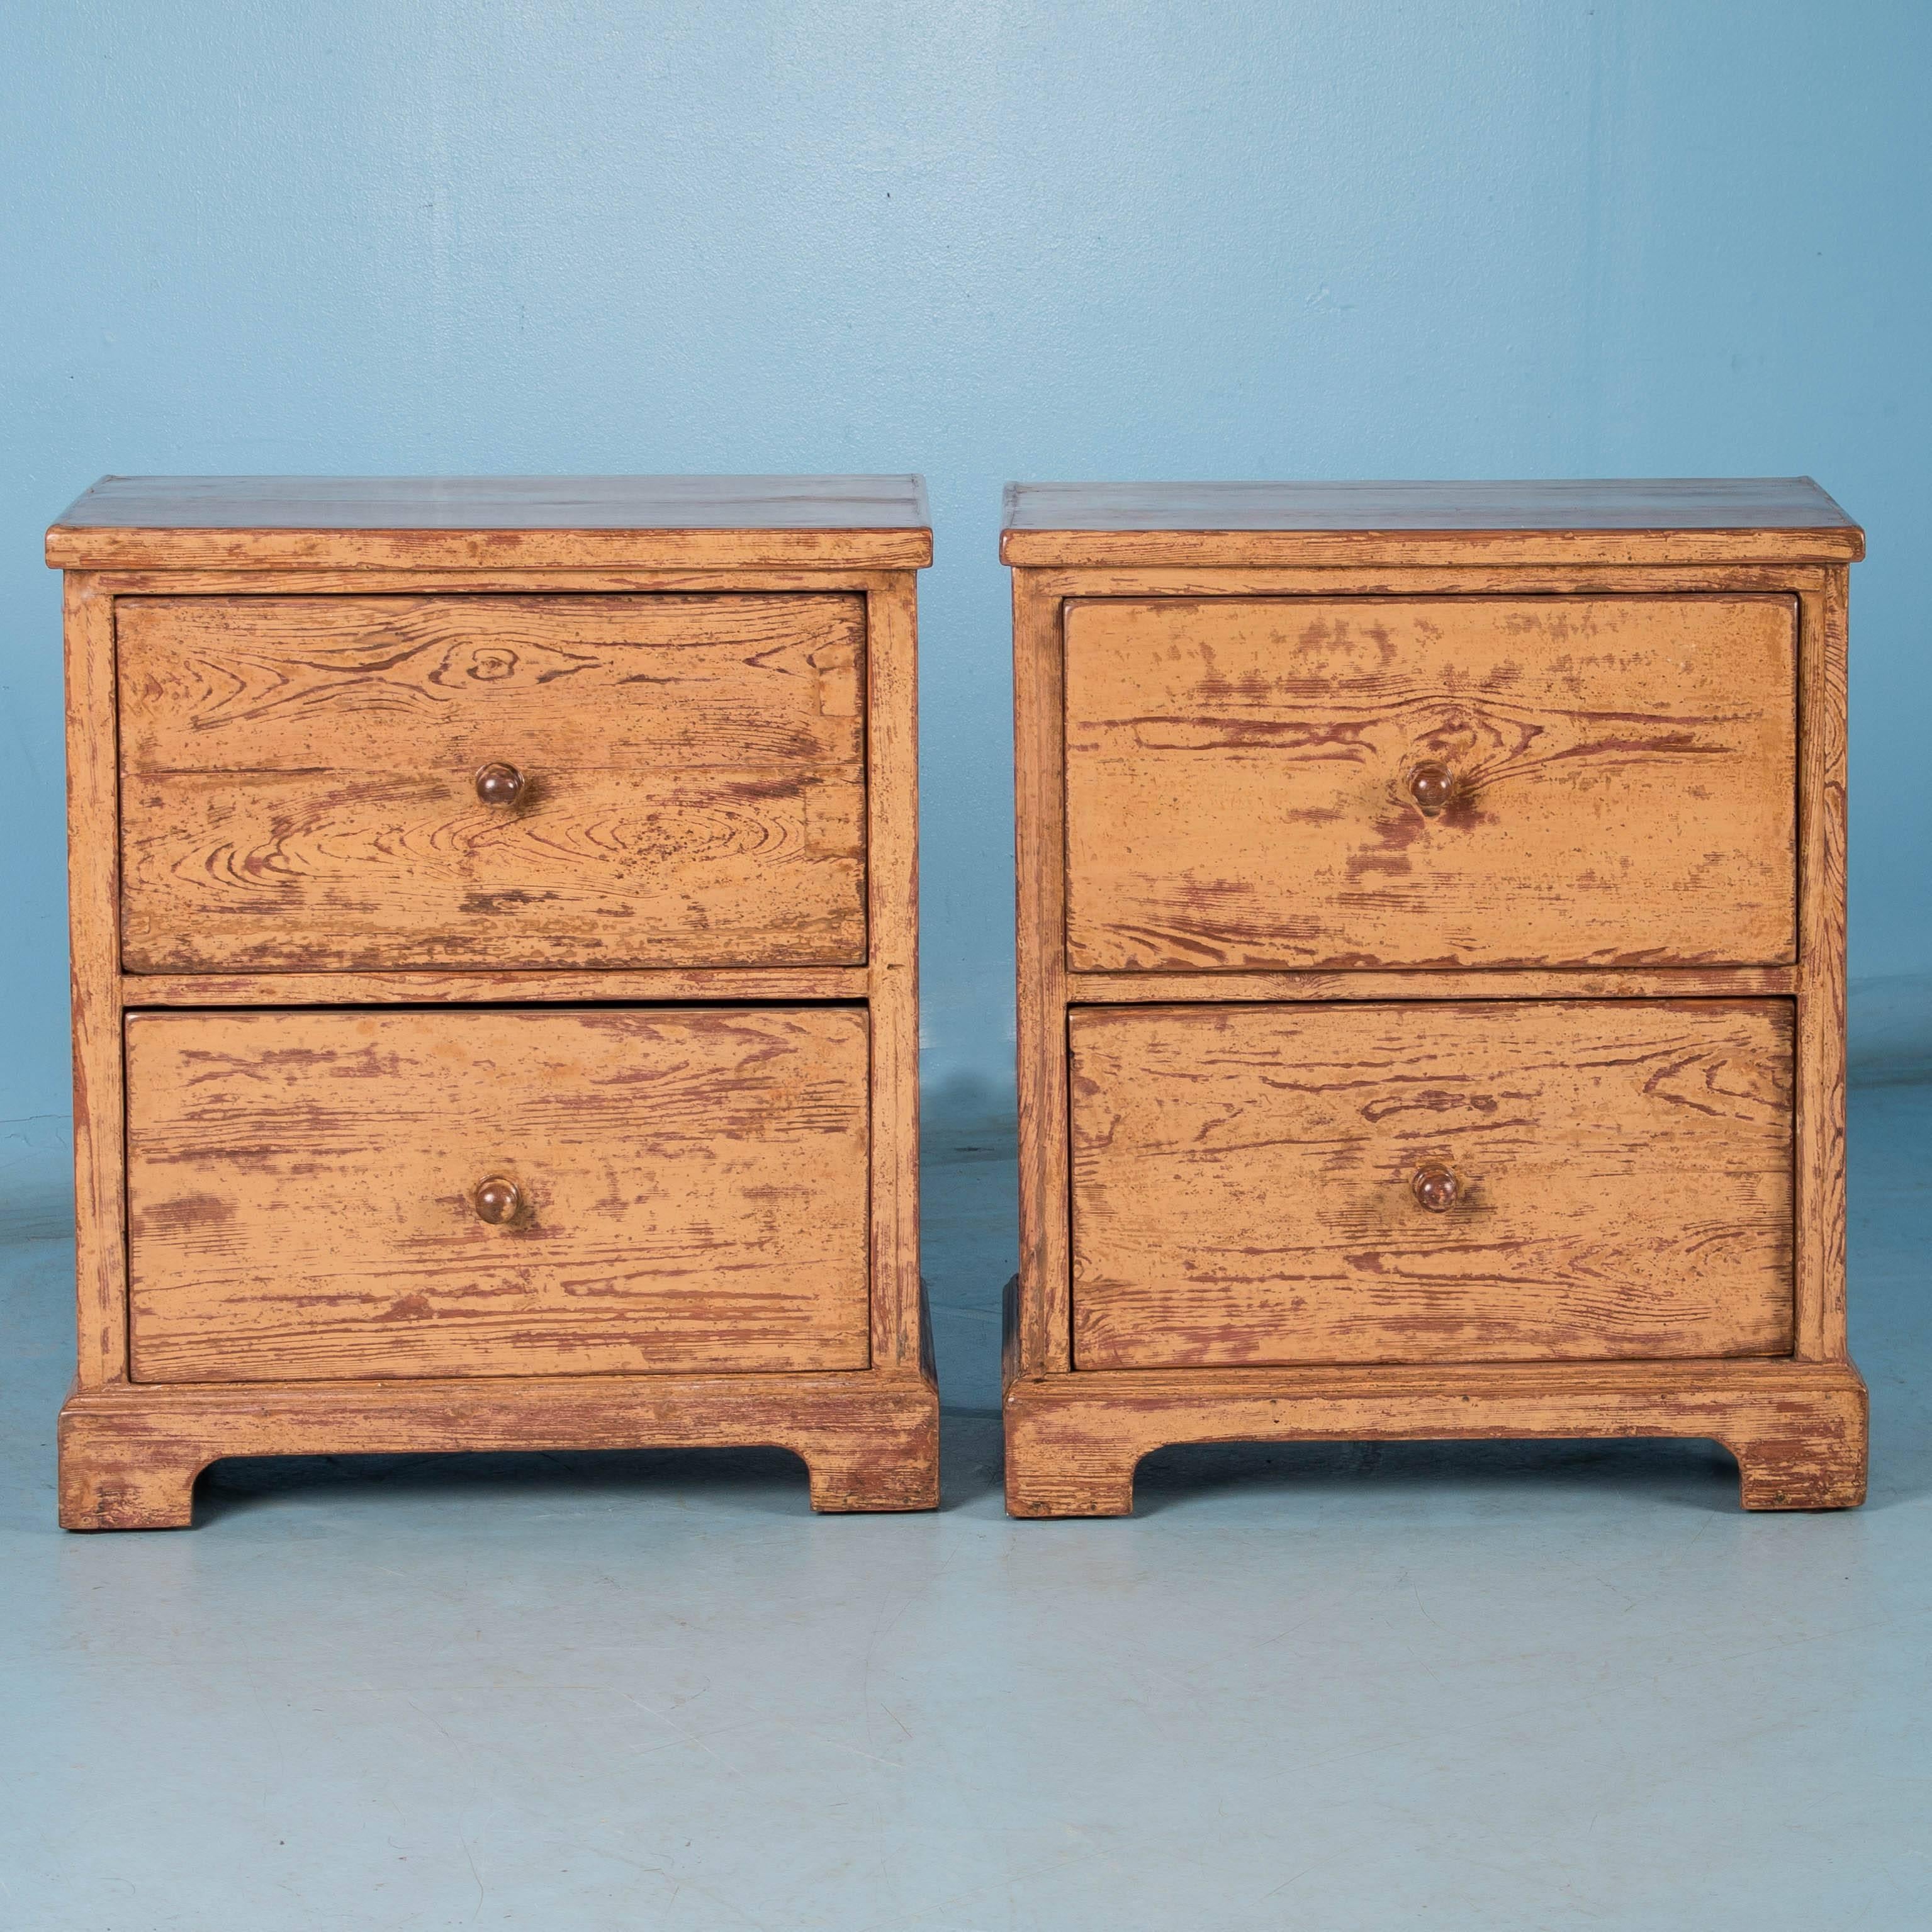 This pair of matching two-drawer cabinets or chest of drawers is unique. One first notices is the beautiful paint, with the original layer of brick red underneath which was later painted over with yellow. Now the layers of paint create great